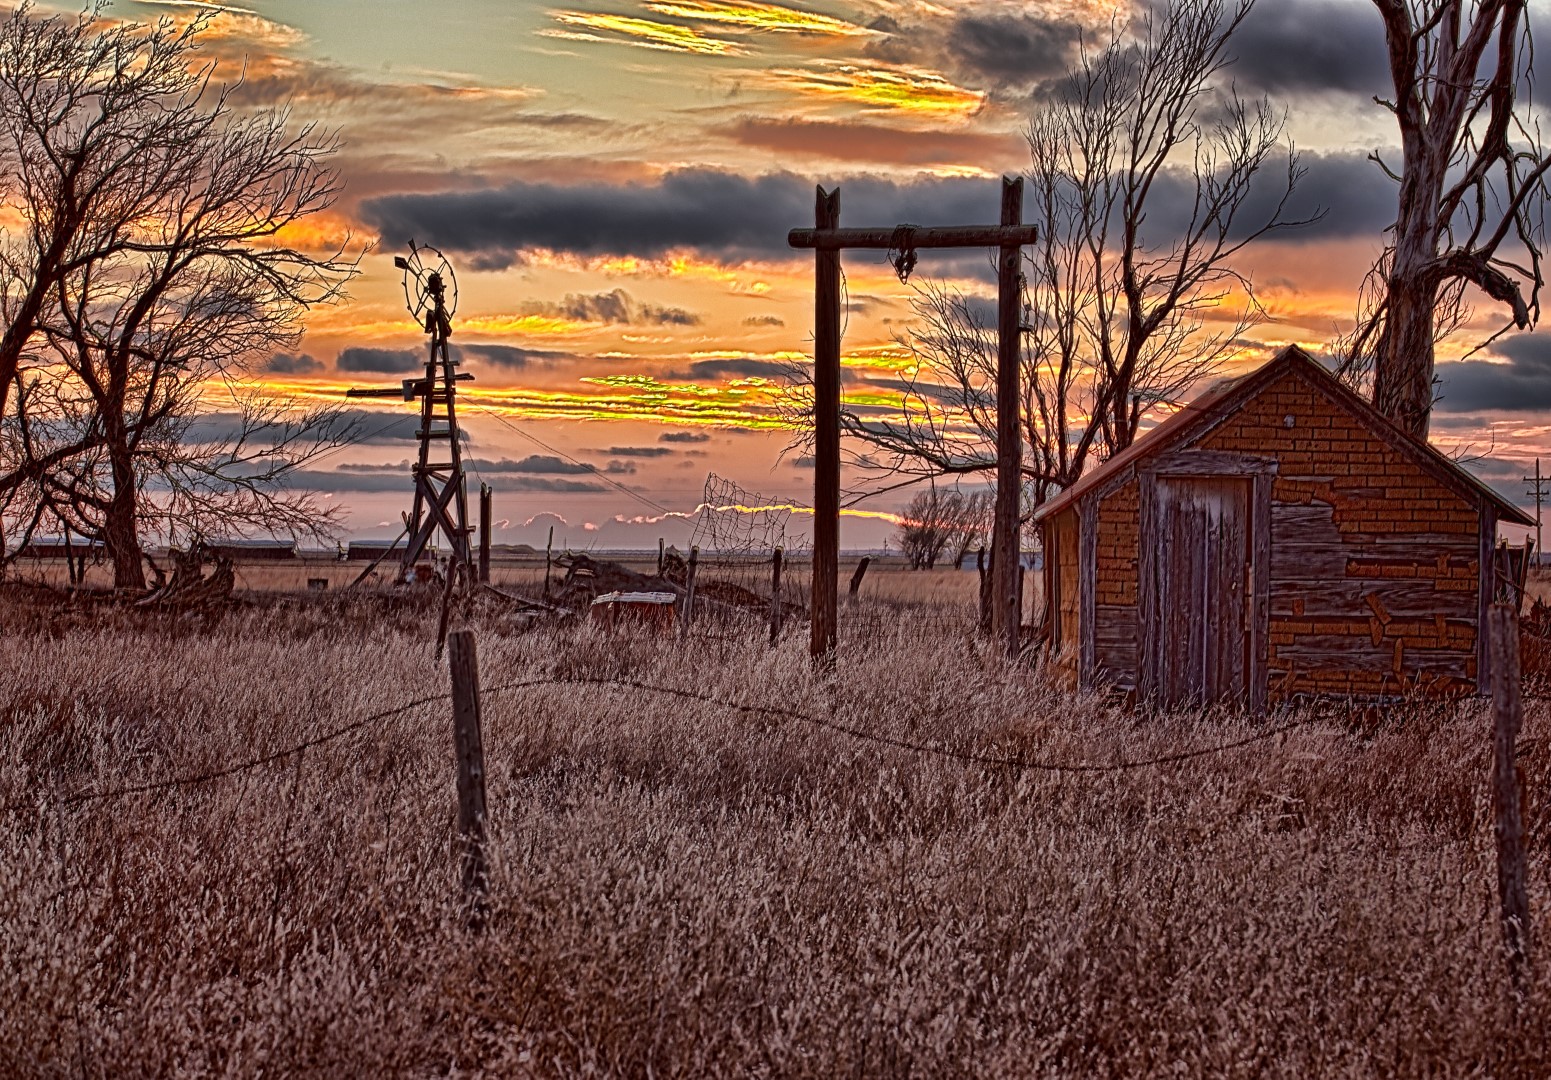 An HDR of a setting winter sun at an abandoned farm in western Finney County Kansas